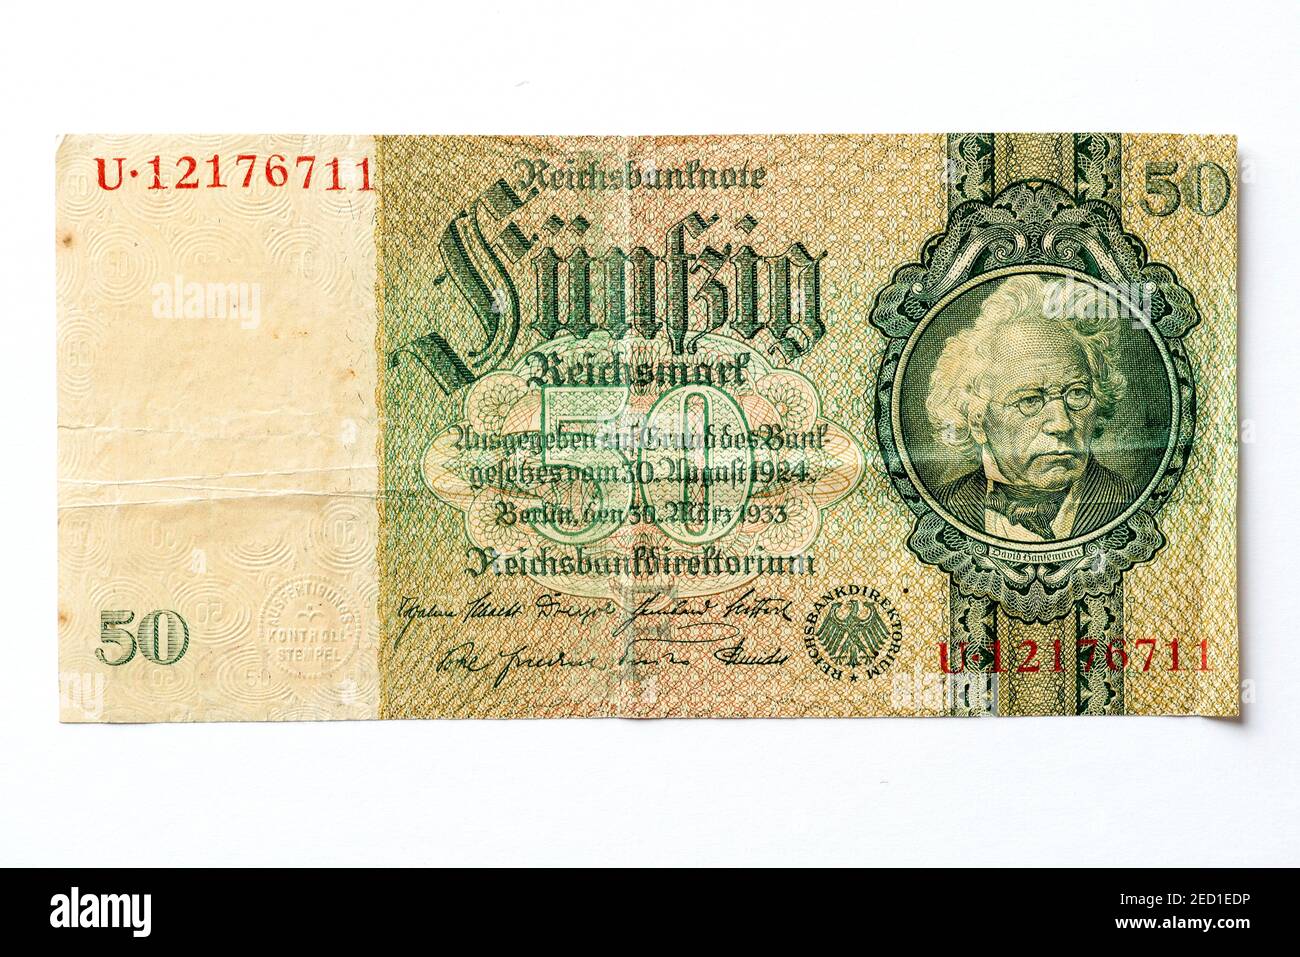 Banknote over Fifty Marks, Reichsmark, 50 RM, obverse with image of David Hansemann, Reichsbanknote from early 1933, Weimar Republic, Germany Stock Photo